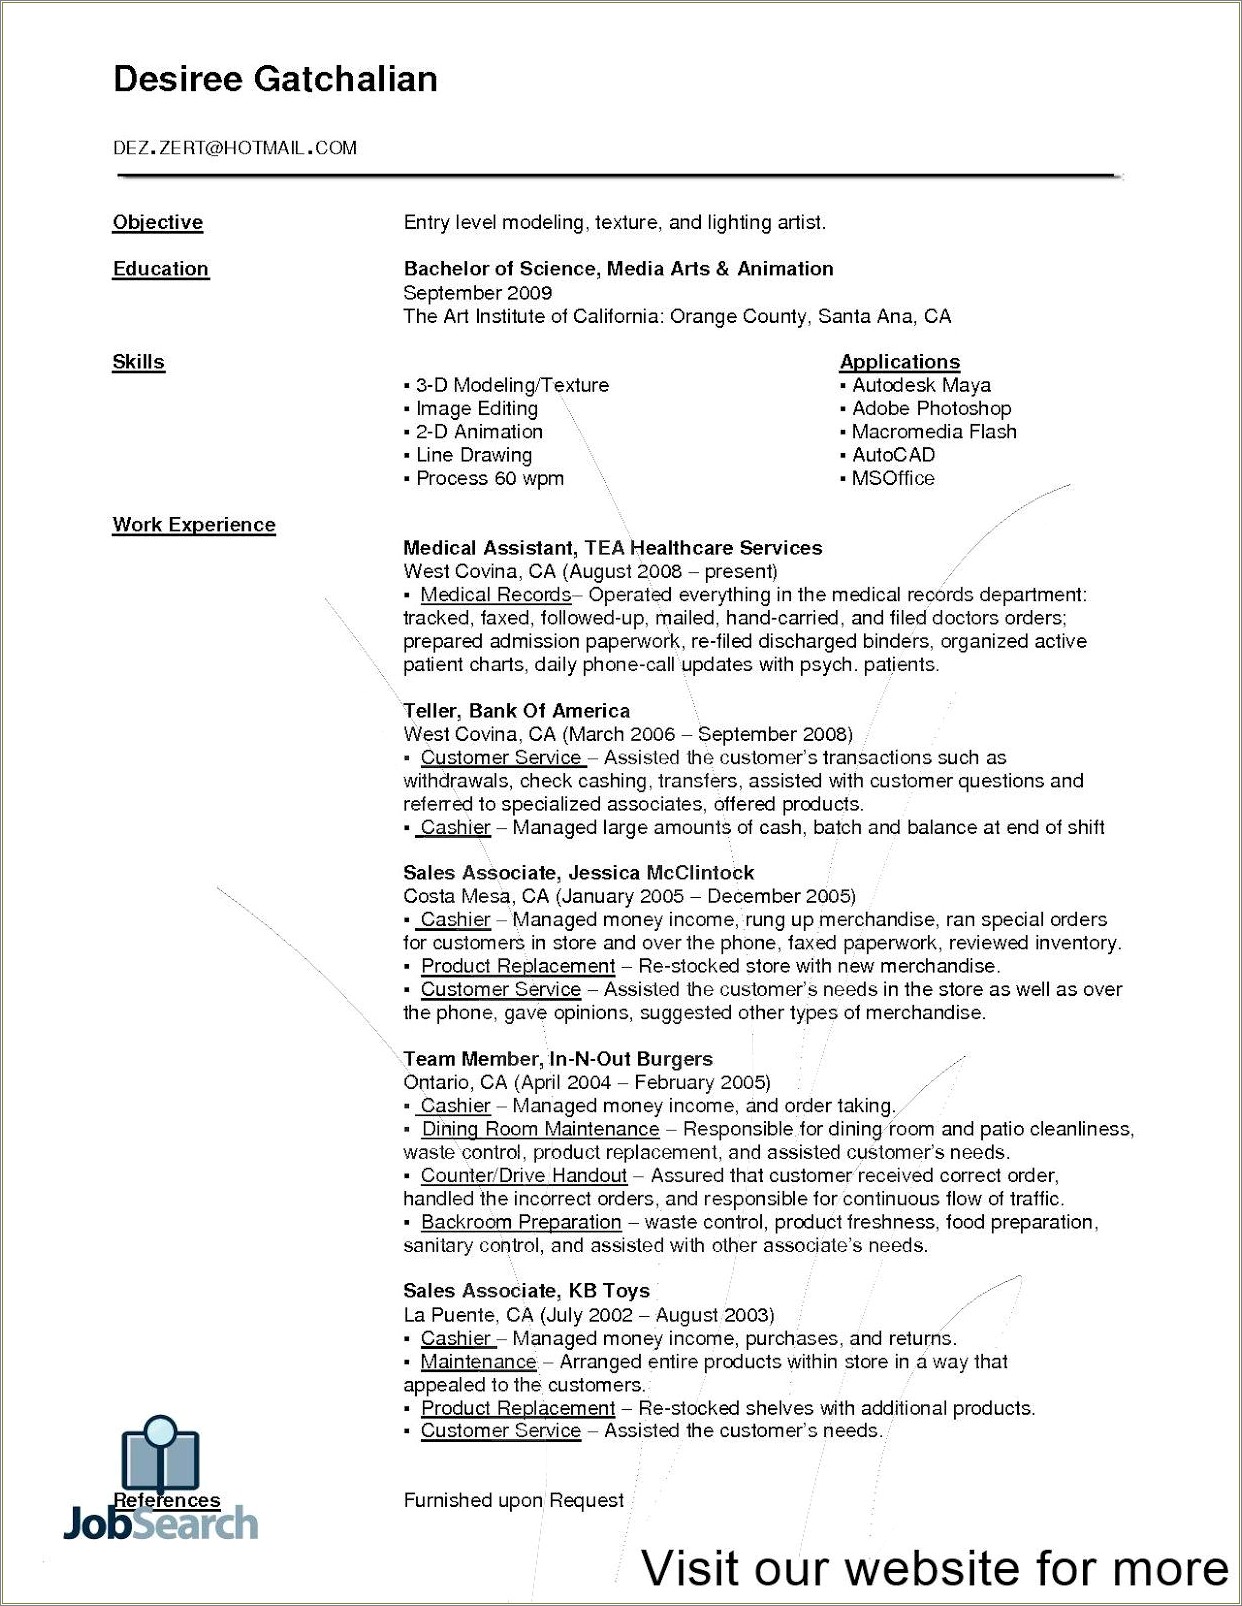 Entry Level Claims Adjuster Resume Samples